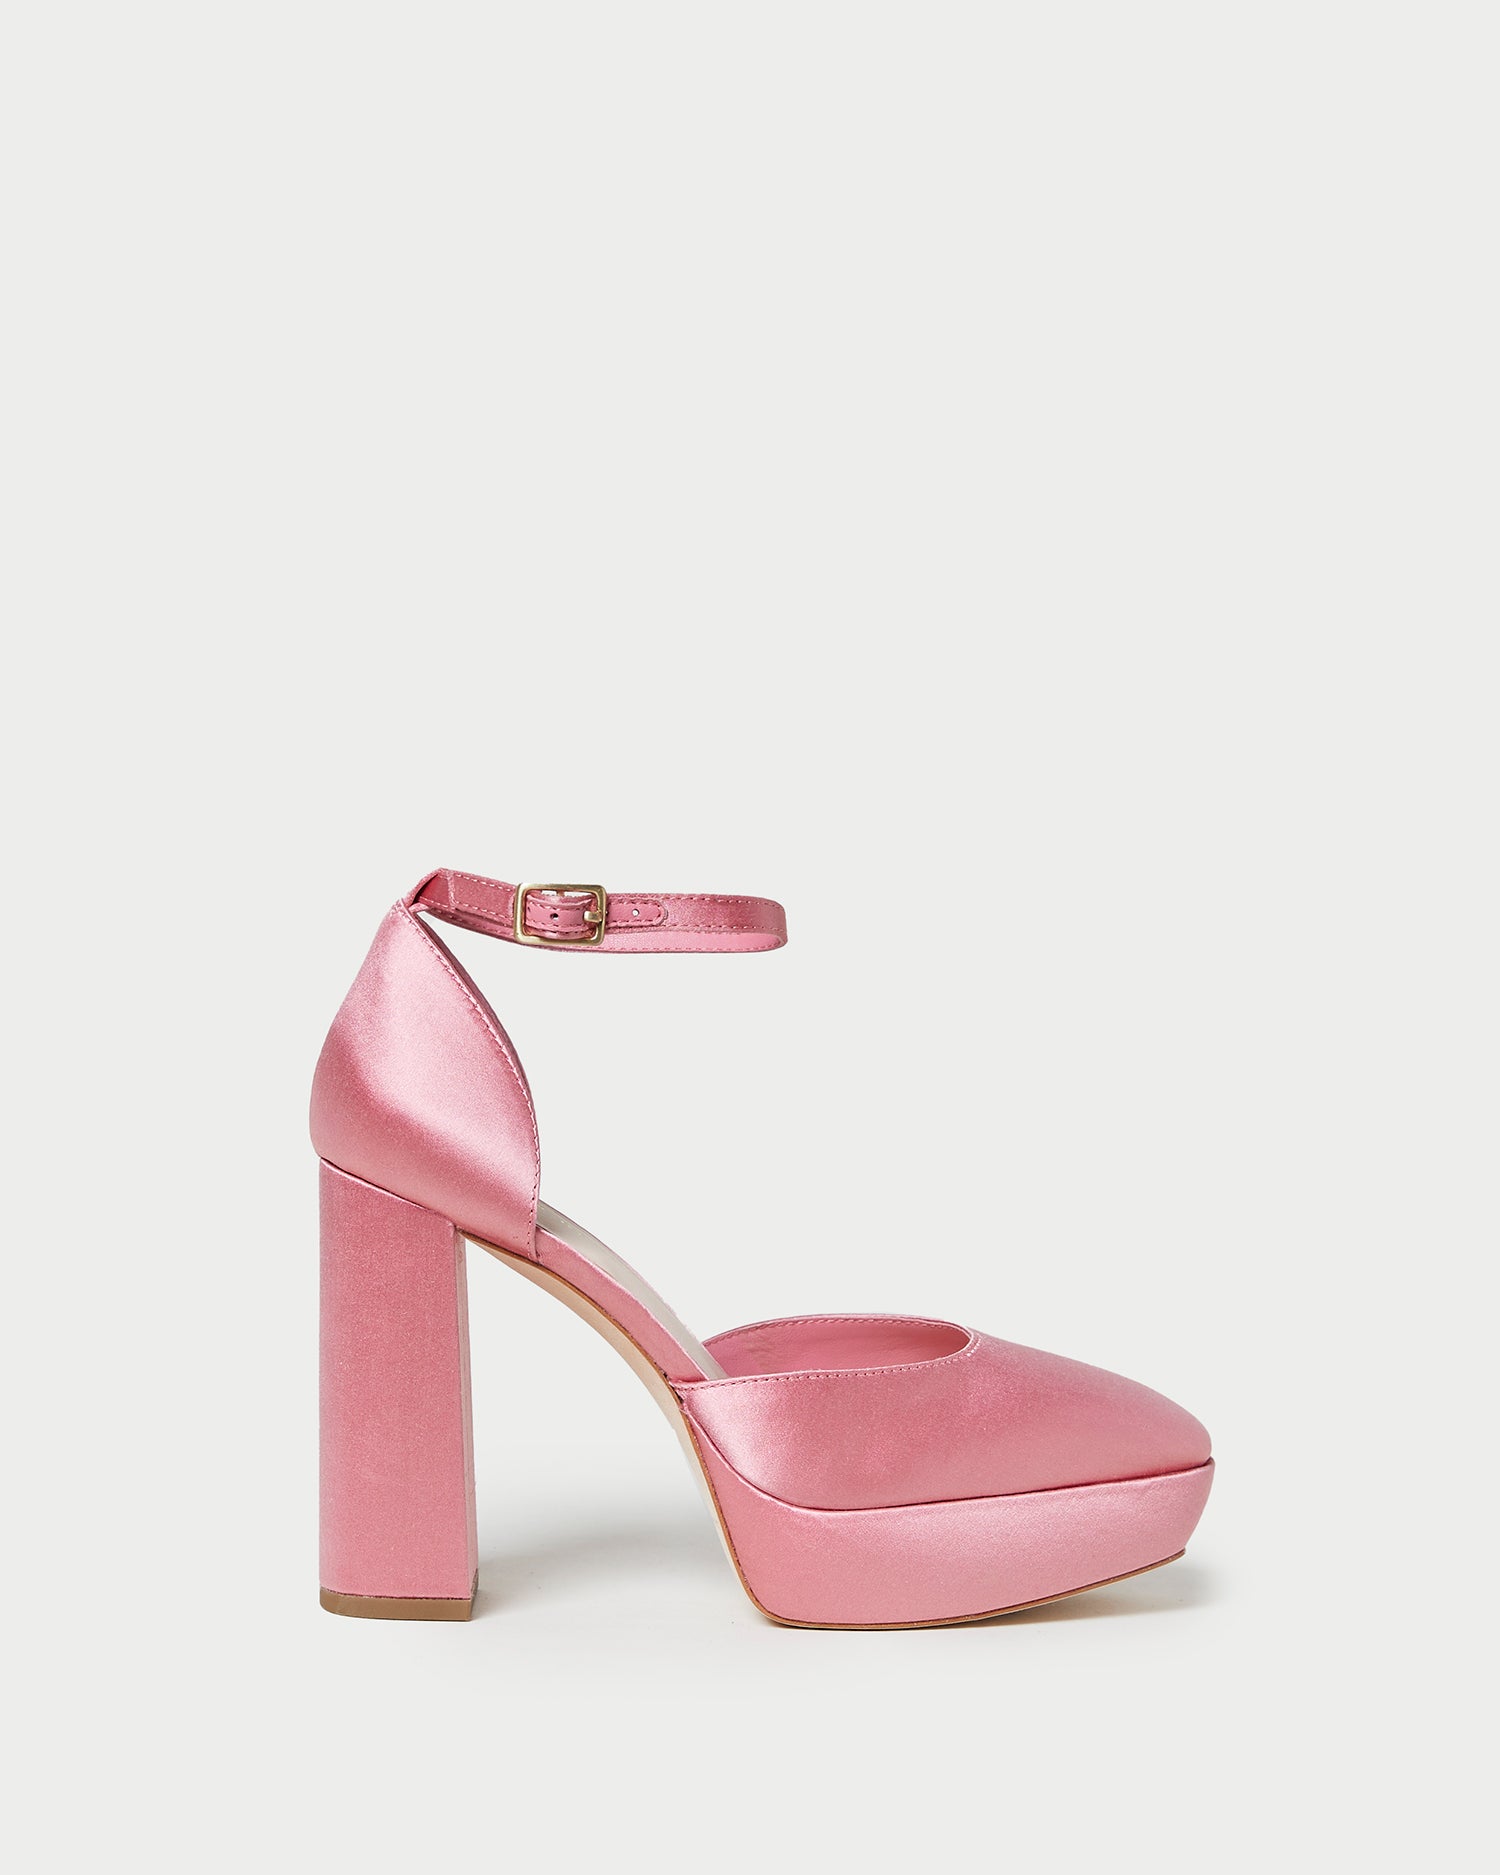 Rise to the occasion in the sky-high platform heels we're obsessed with